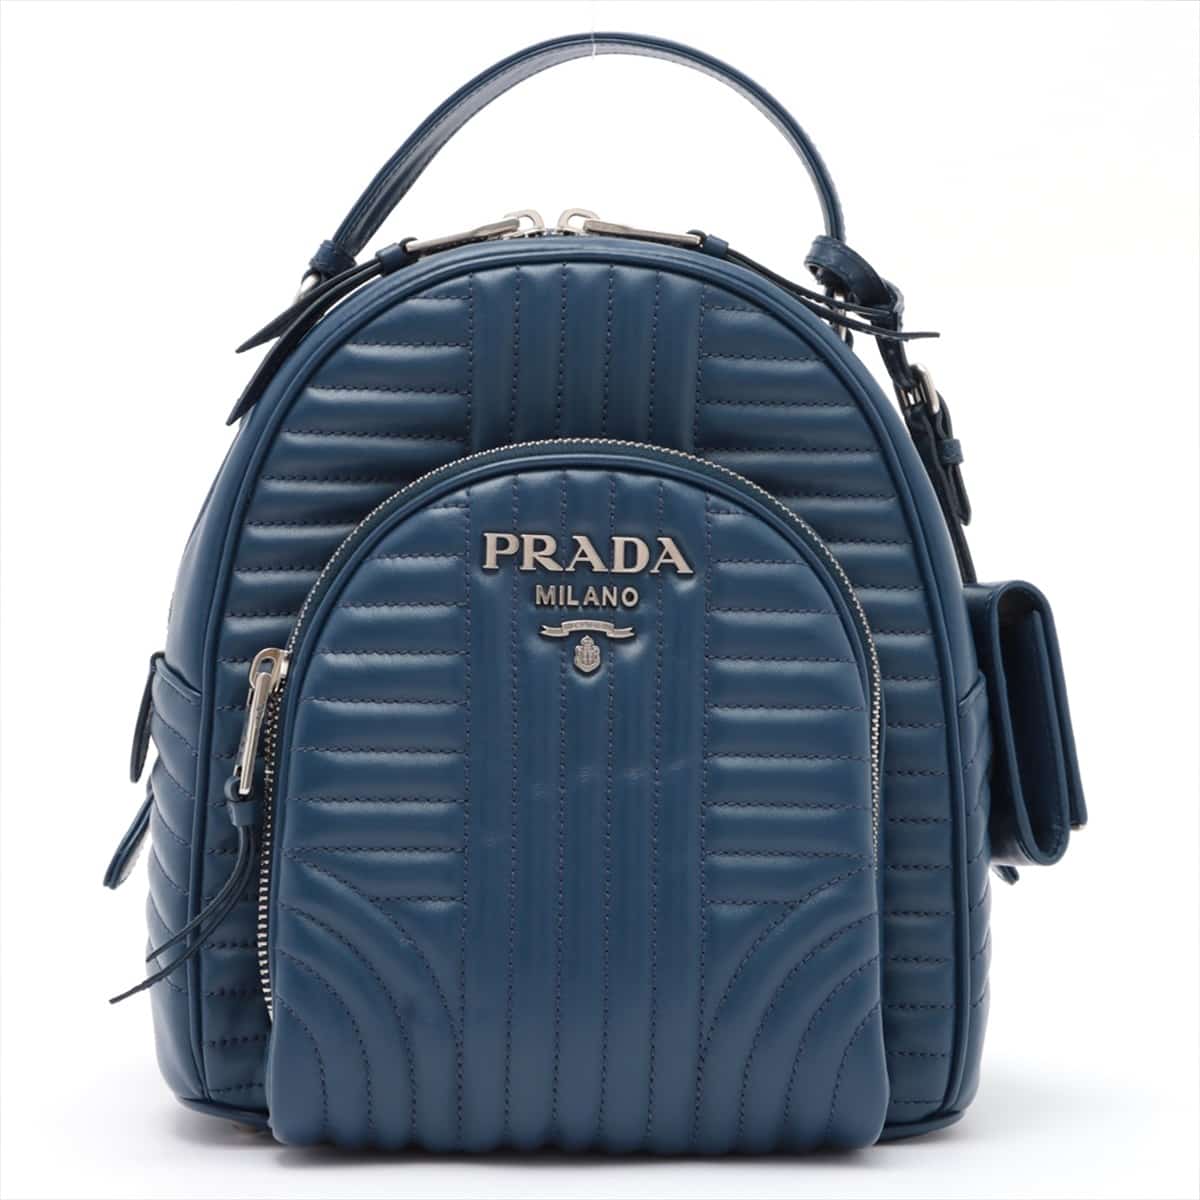 Prada Leather Backpack Blue 1BZ030 open papers